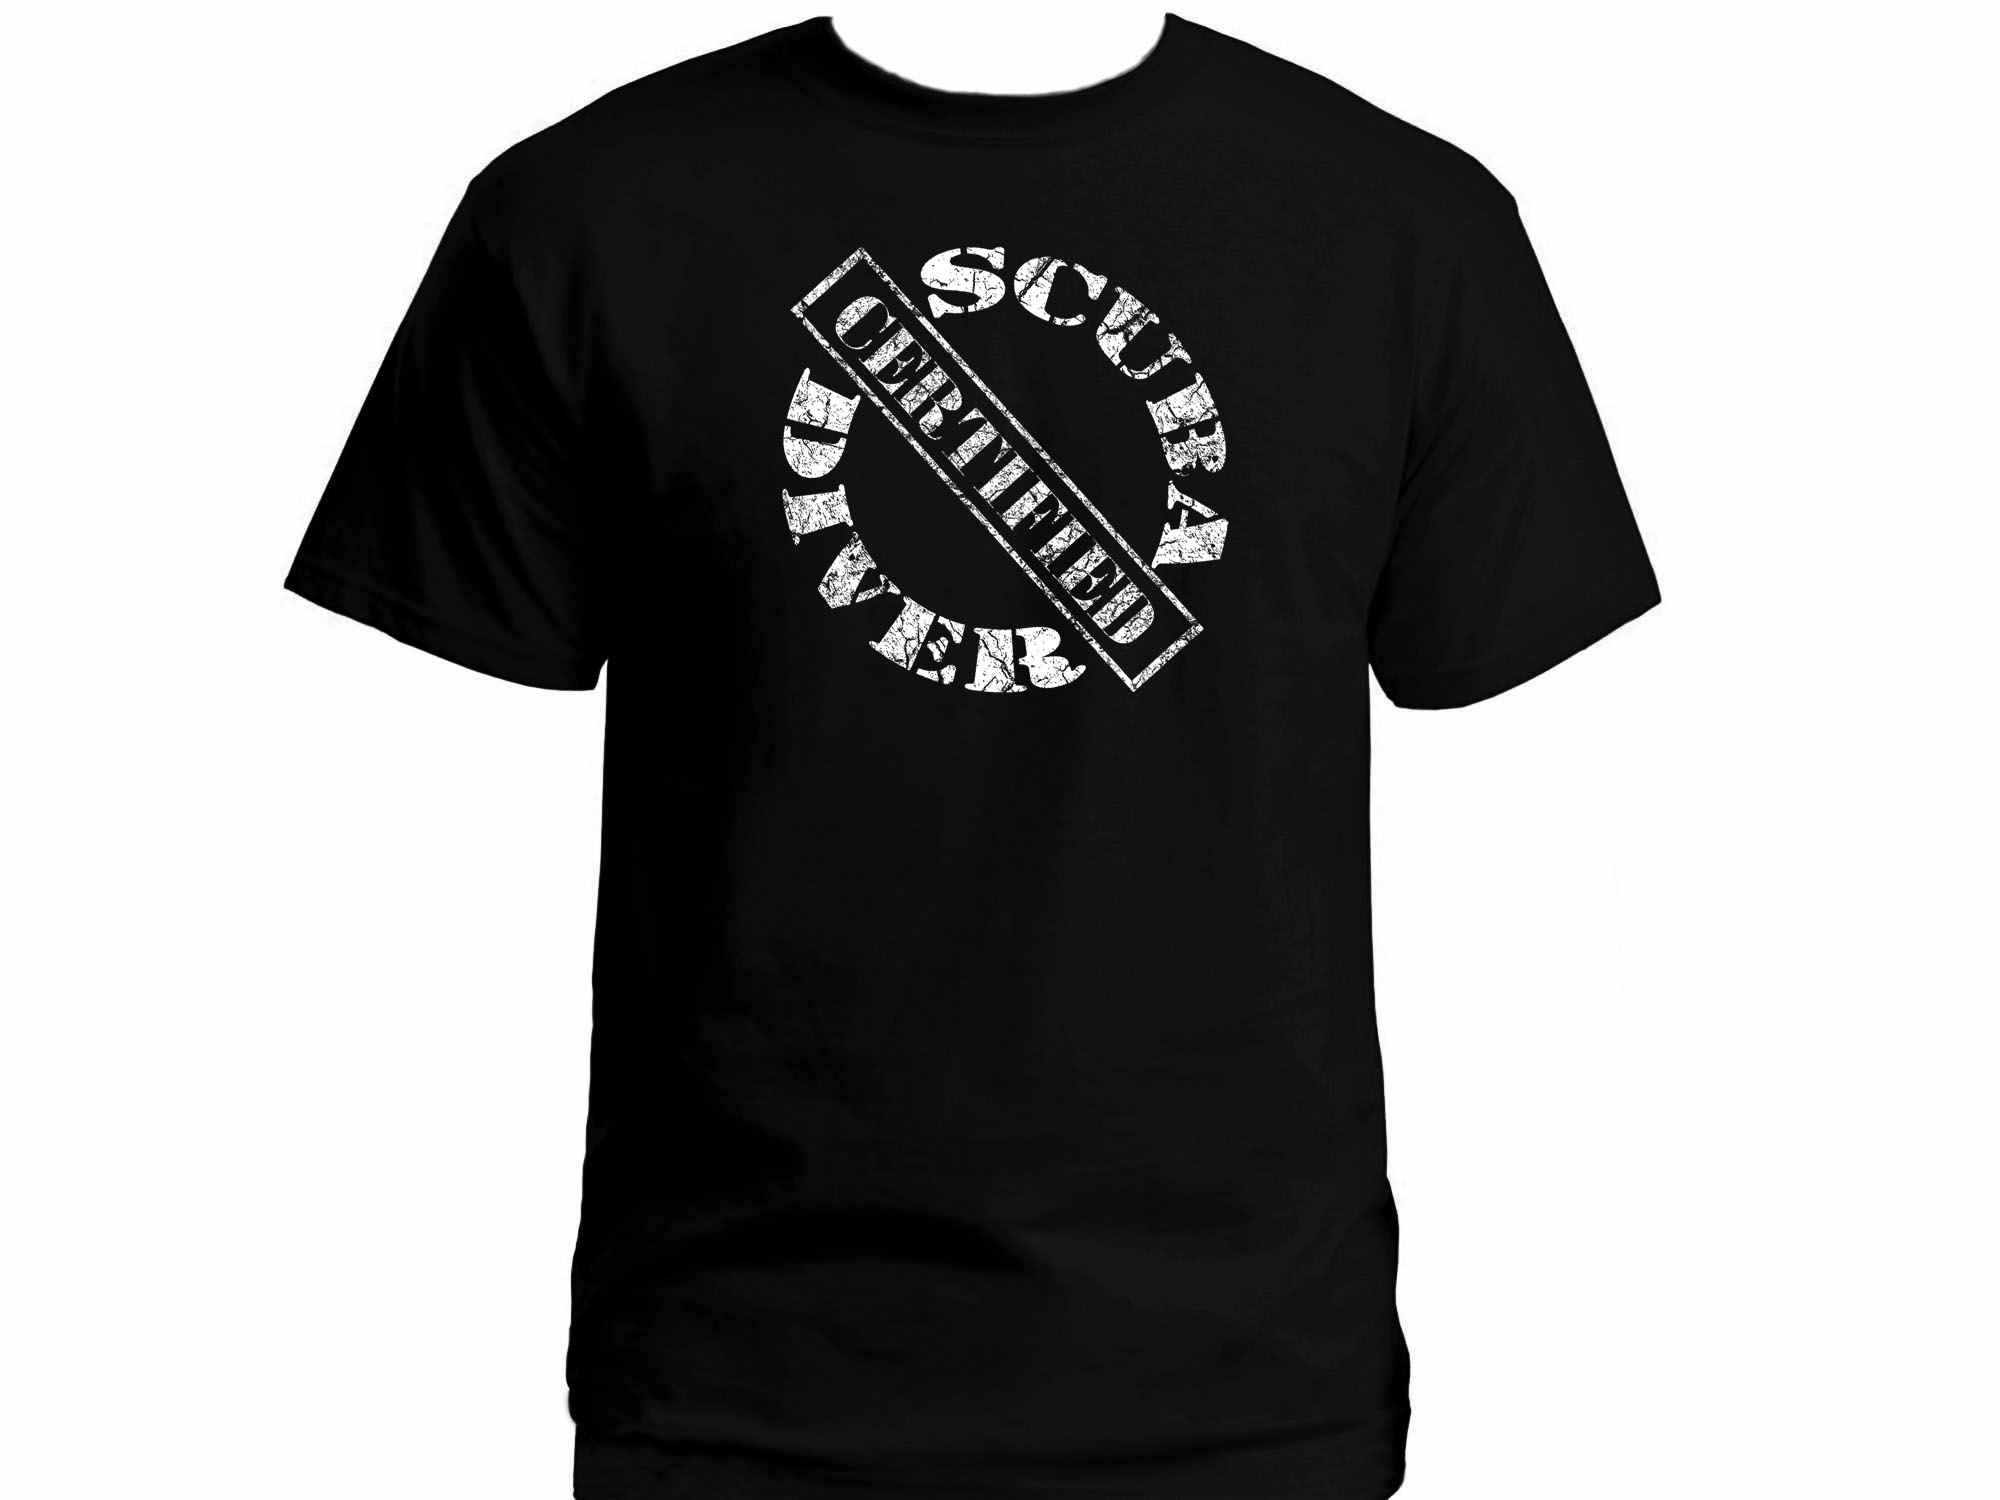 Scuba diver certified distressed look t-shirt